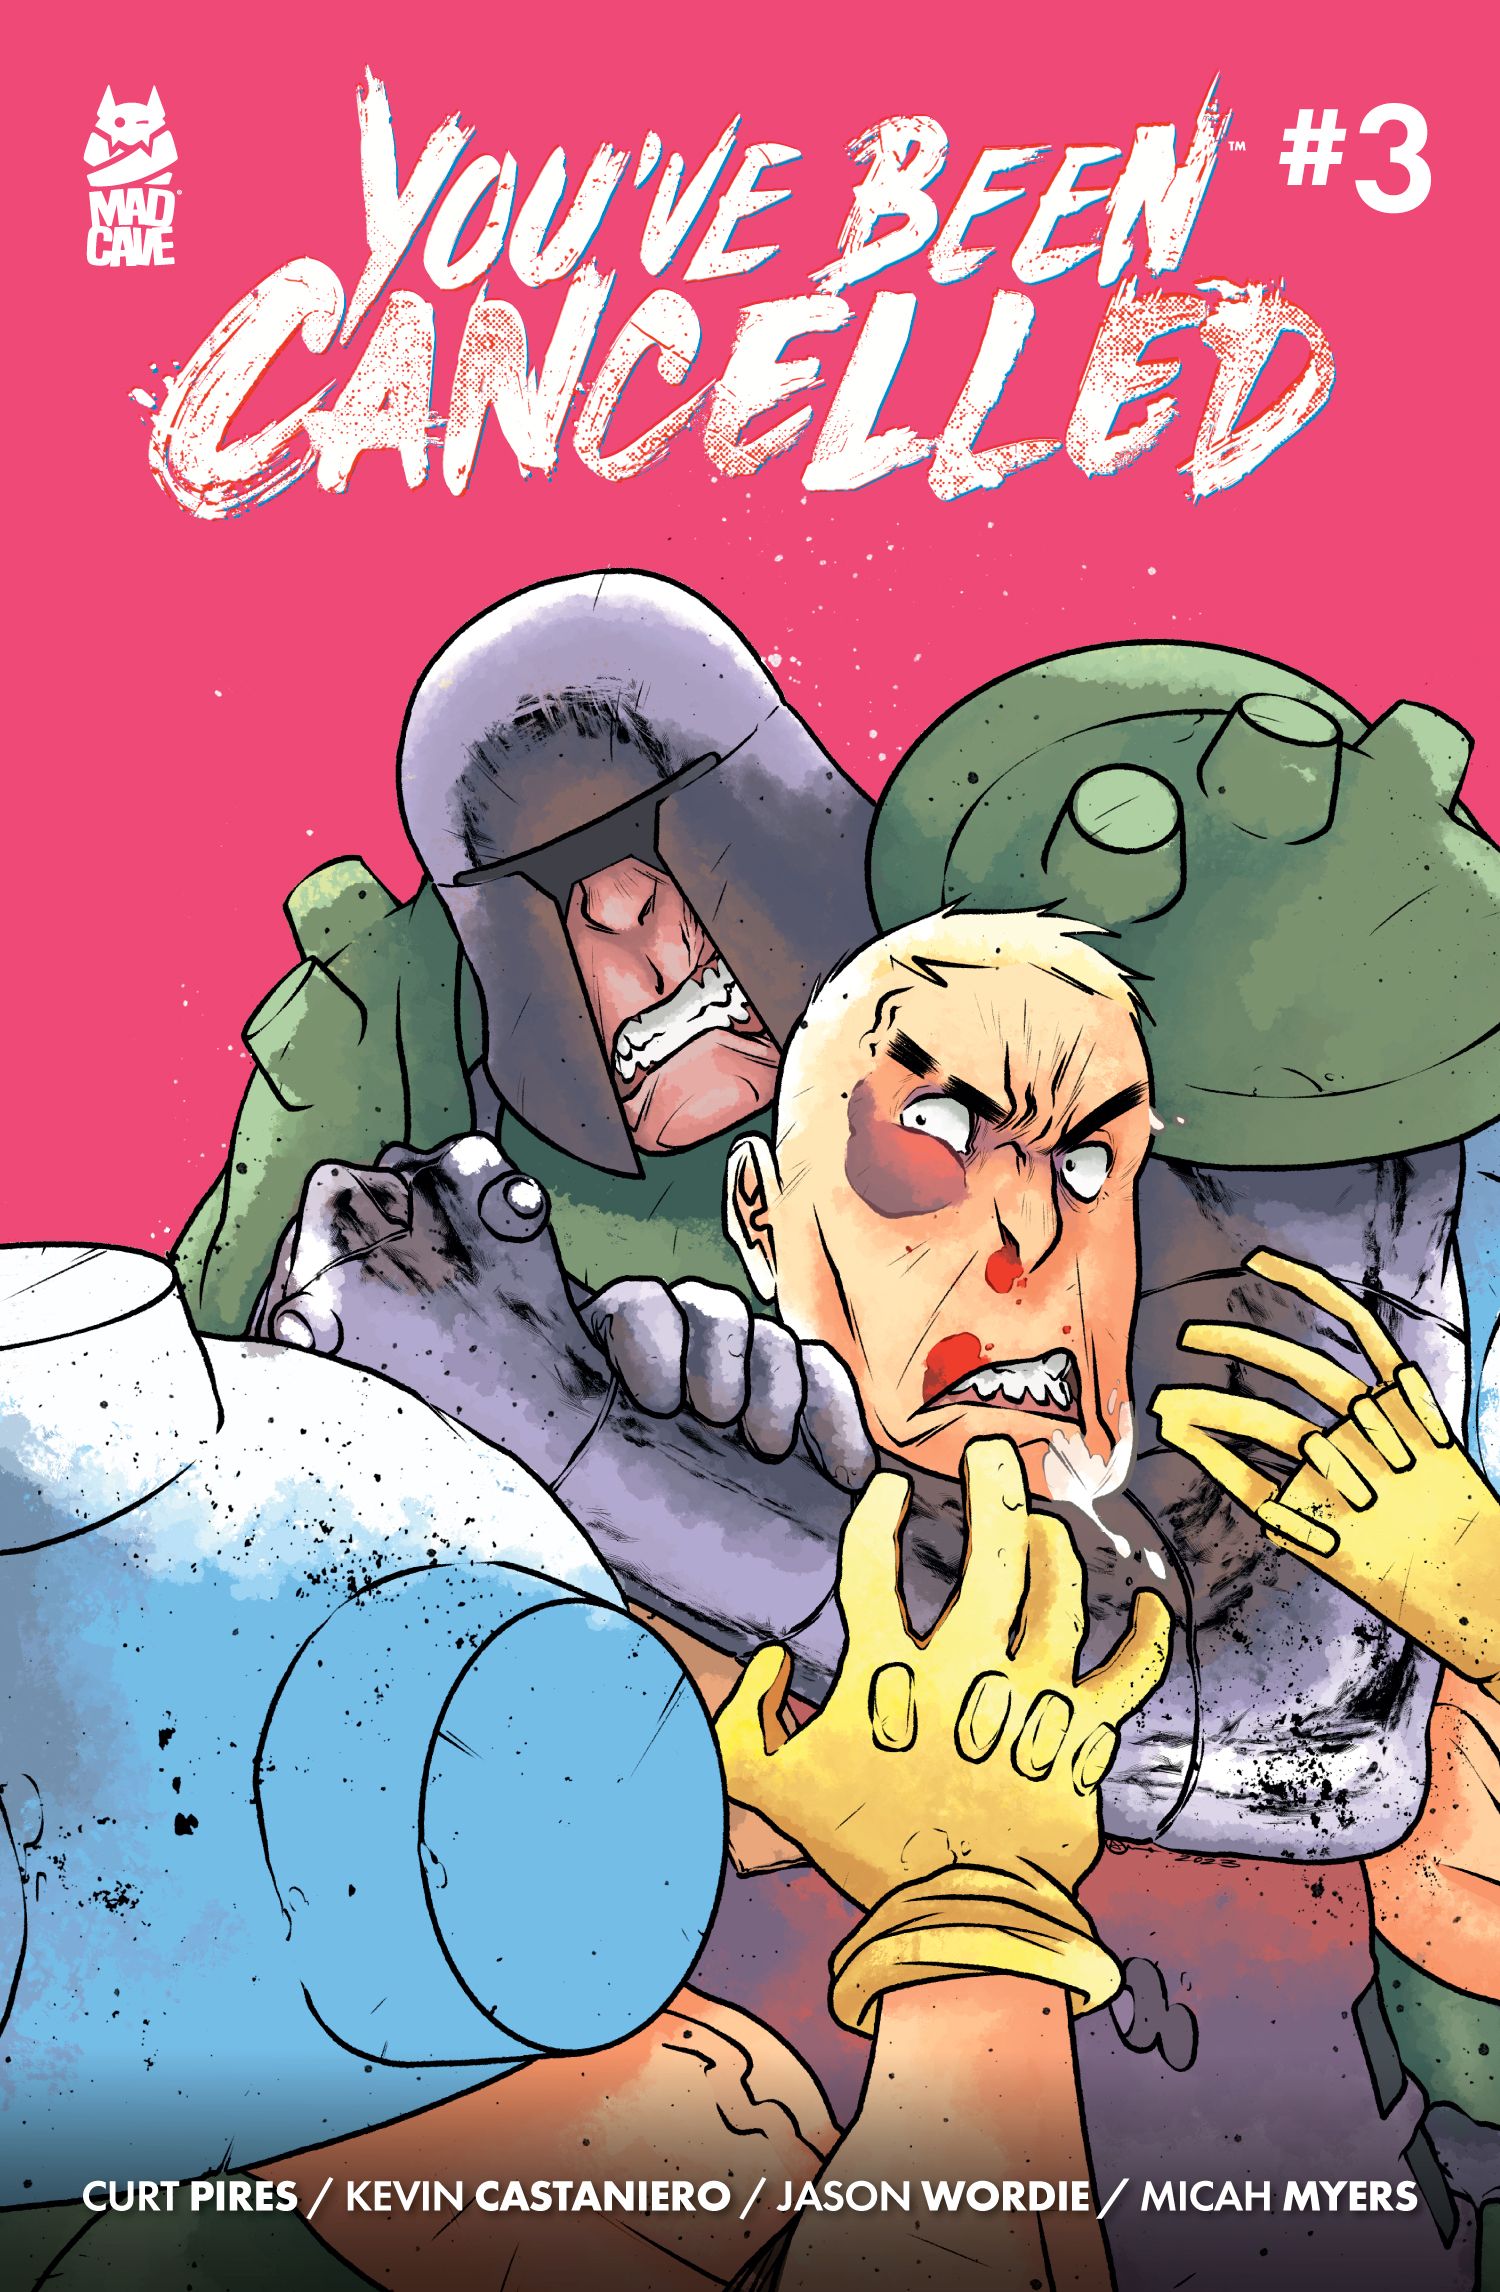 You've Been Cancelled #3 Comic